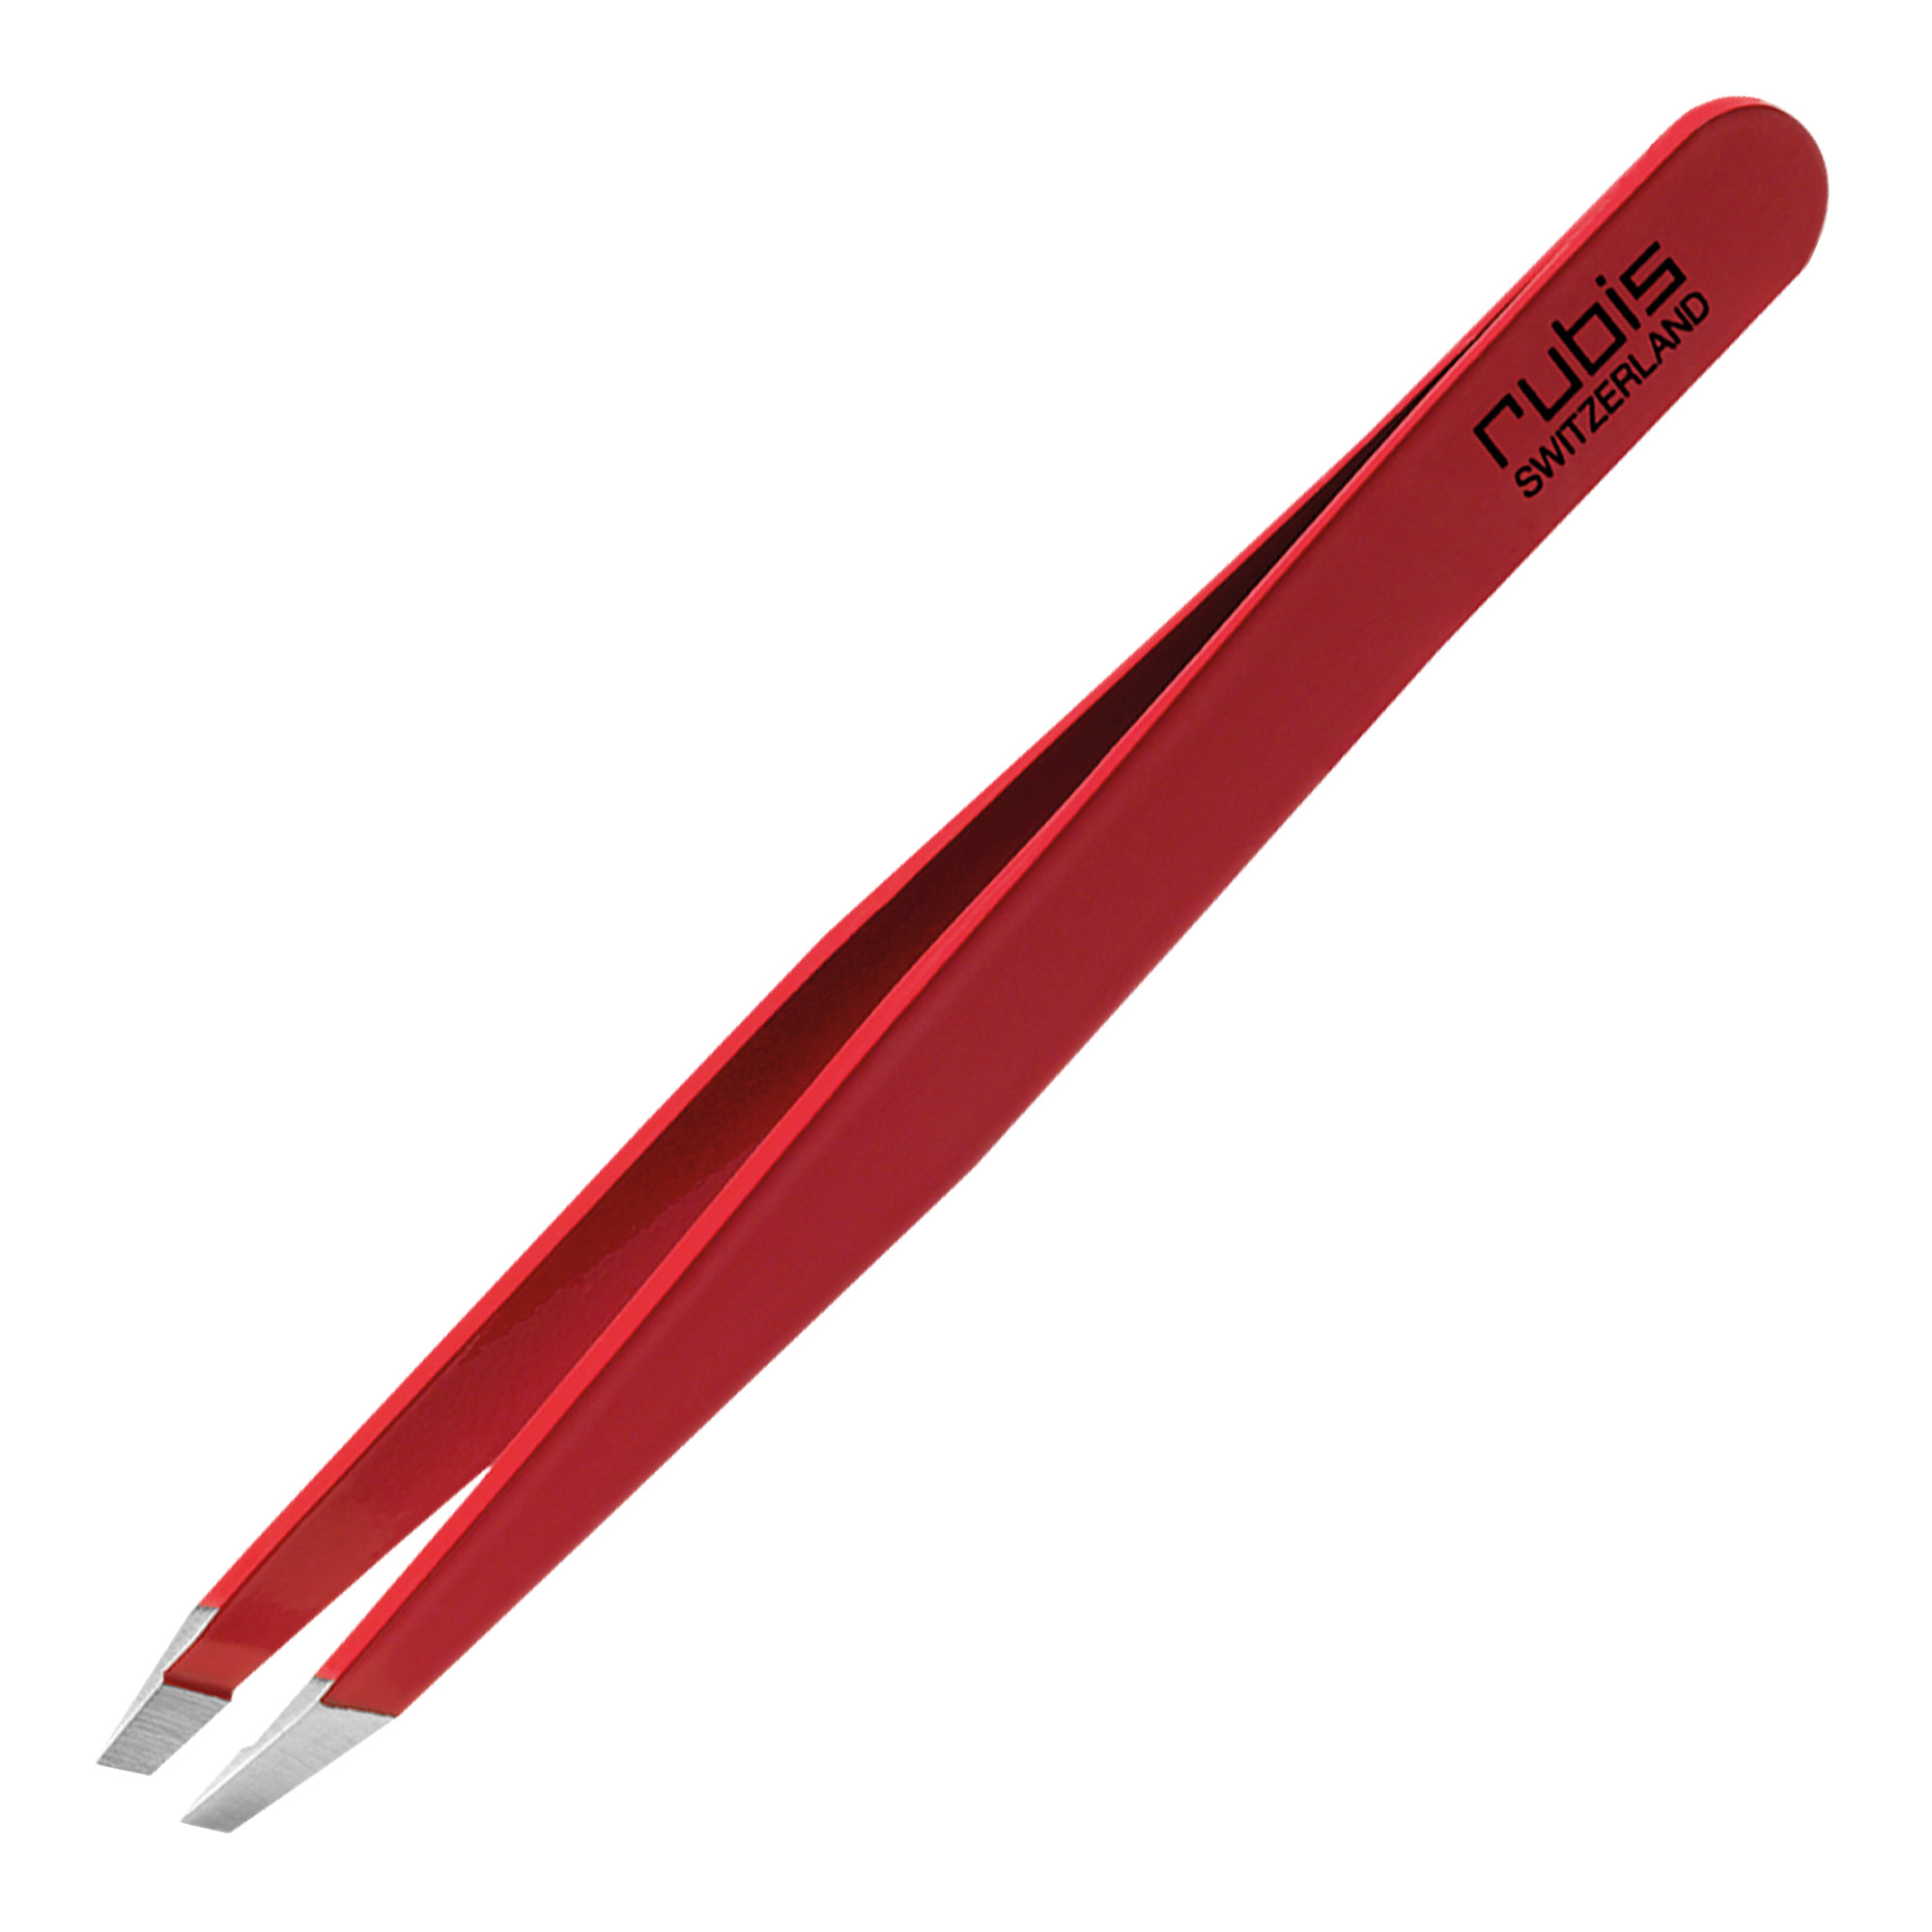 Rubis stainless steel tweezers with slant tip red